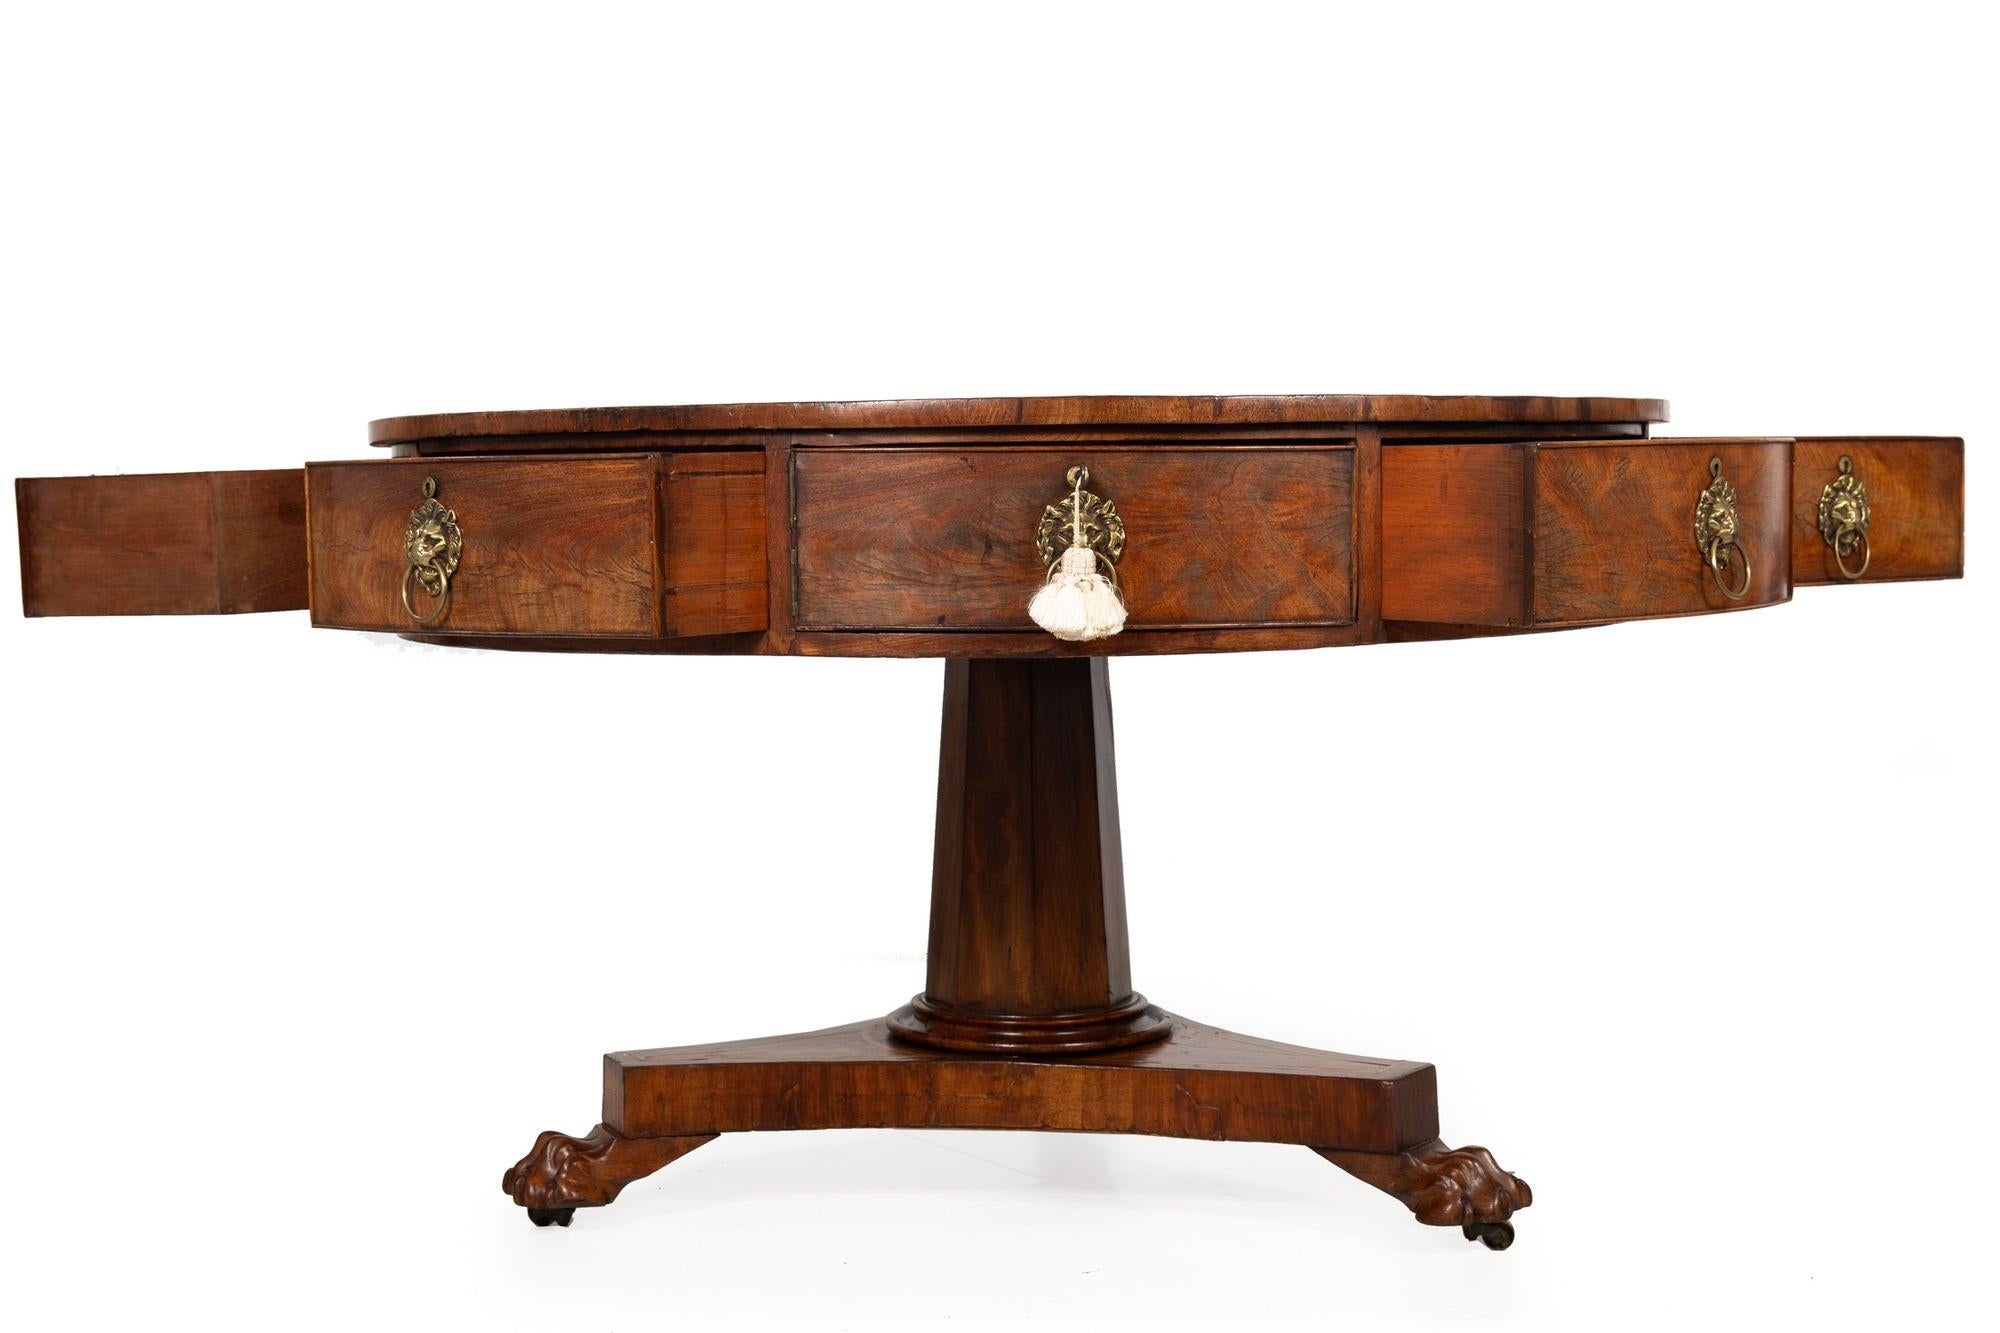 REGENCY MAHOGANY AND TOOLED-LEATHER DRUM OR RENT TABLE
England, ca. 2nd quarter of 19th century  over animal paw feet, retaining original lion mask pulls
Item # 306SEG14A
A bold and powerful circular rent table from the Regency period, it features a